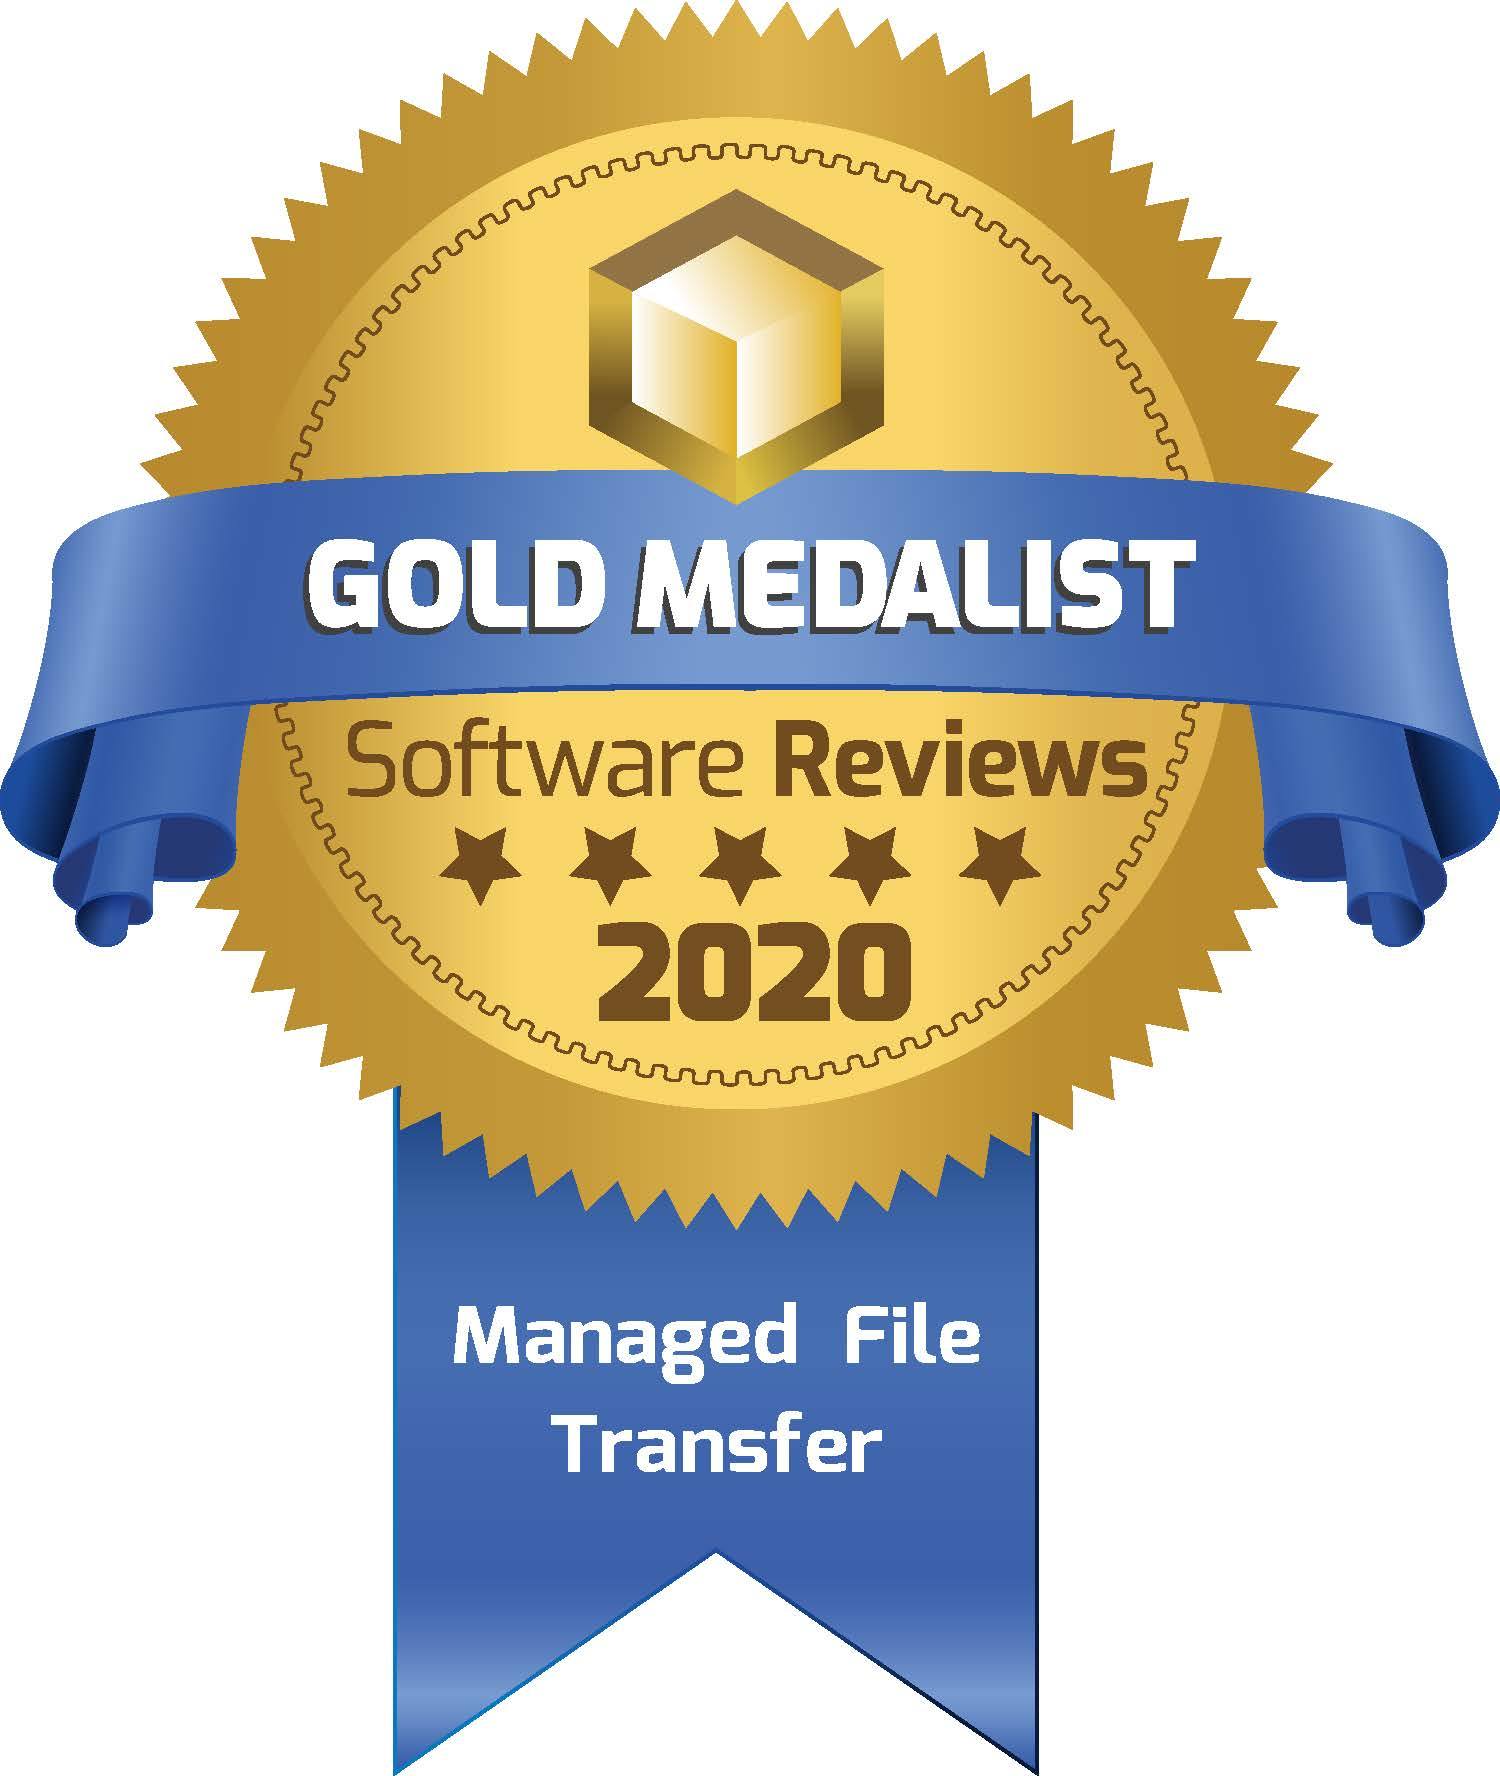 Progress MOVEit Earns Gold in 2020 Managed File Transfer Data Quadrant